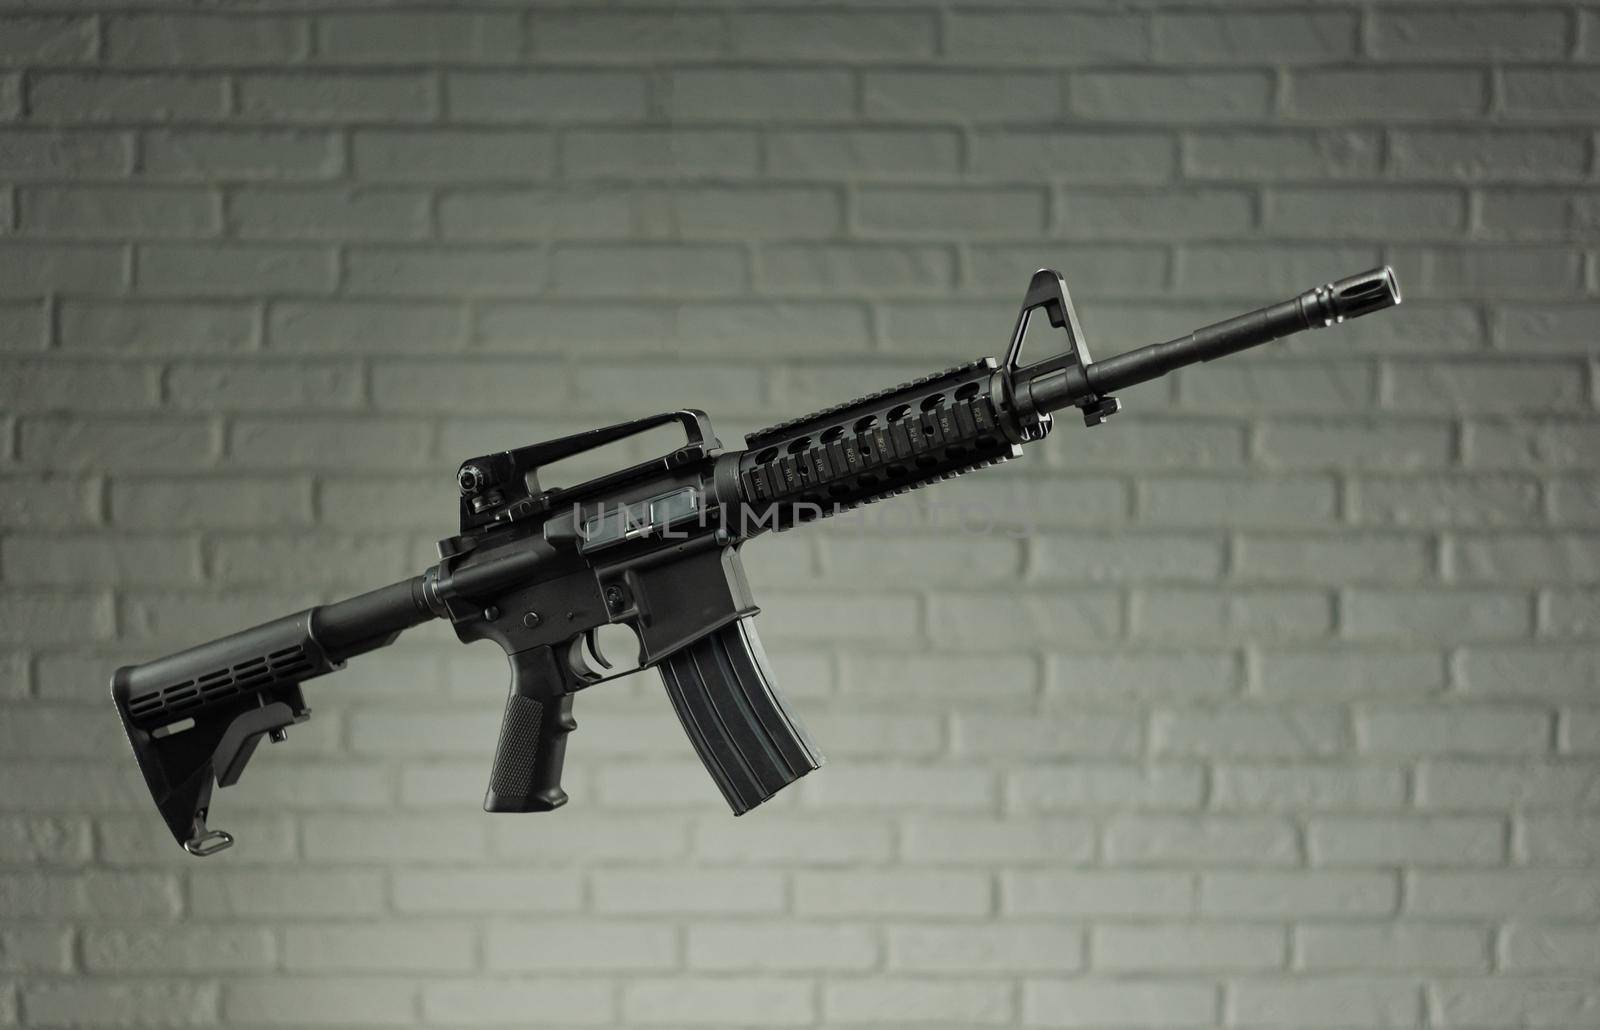 the American army rifle M4A1 against a brick wall